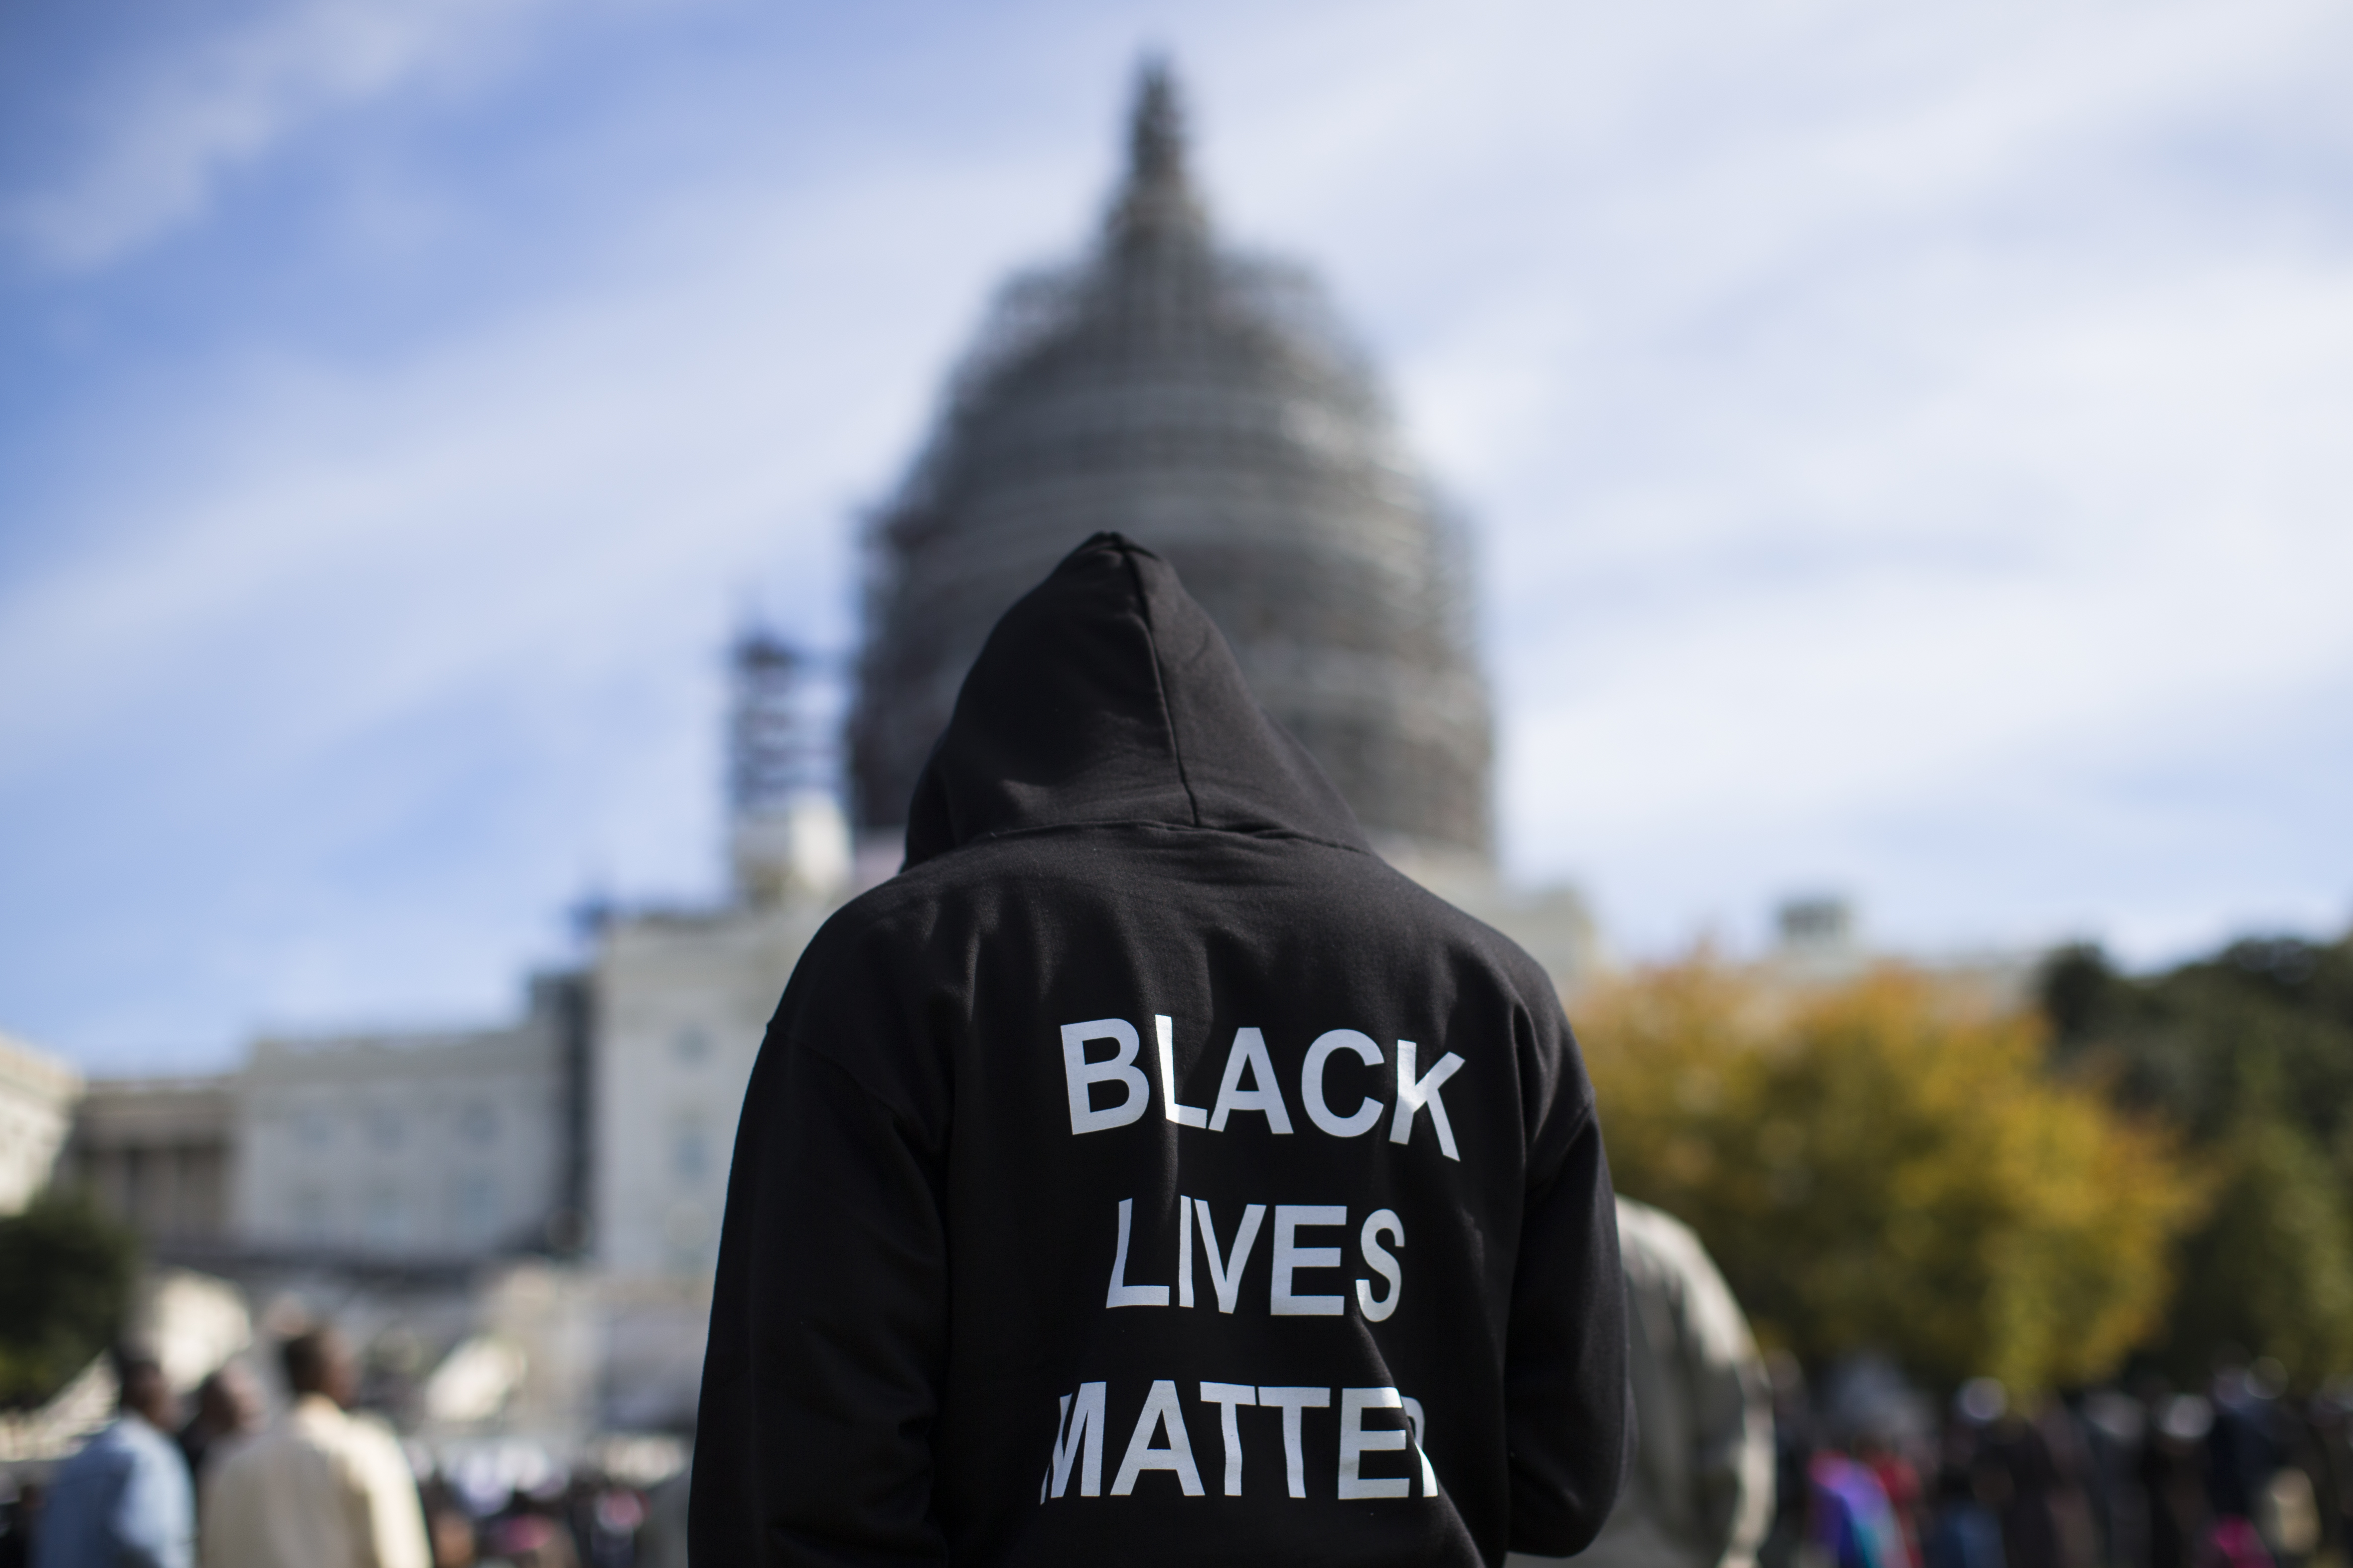 Neal Blair, of Augusta, Ga. stands on the lawn of the Capitol building during a rally to mark the 20th anniversary of the Million Man March, on Capitol Hill, on Oct. 10, 2015, in Washington. (Evan Vucci—AP)